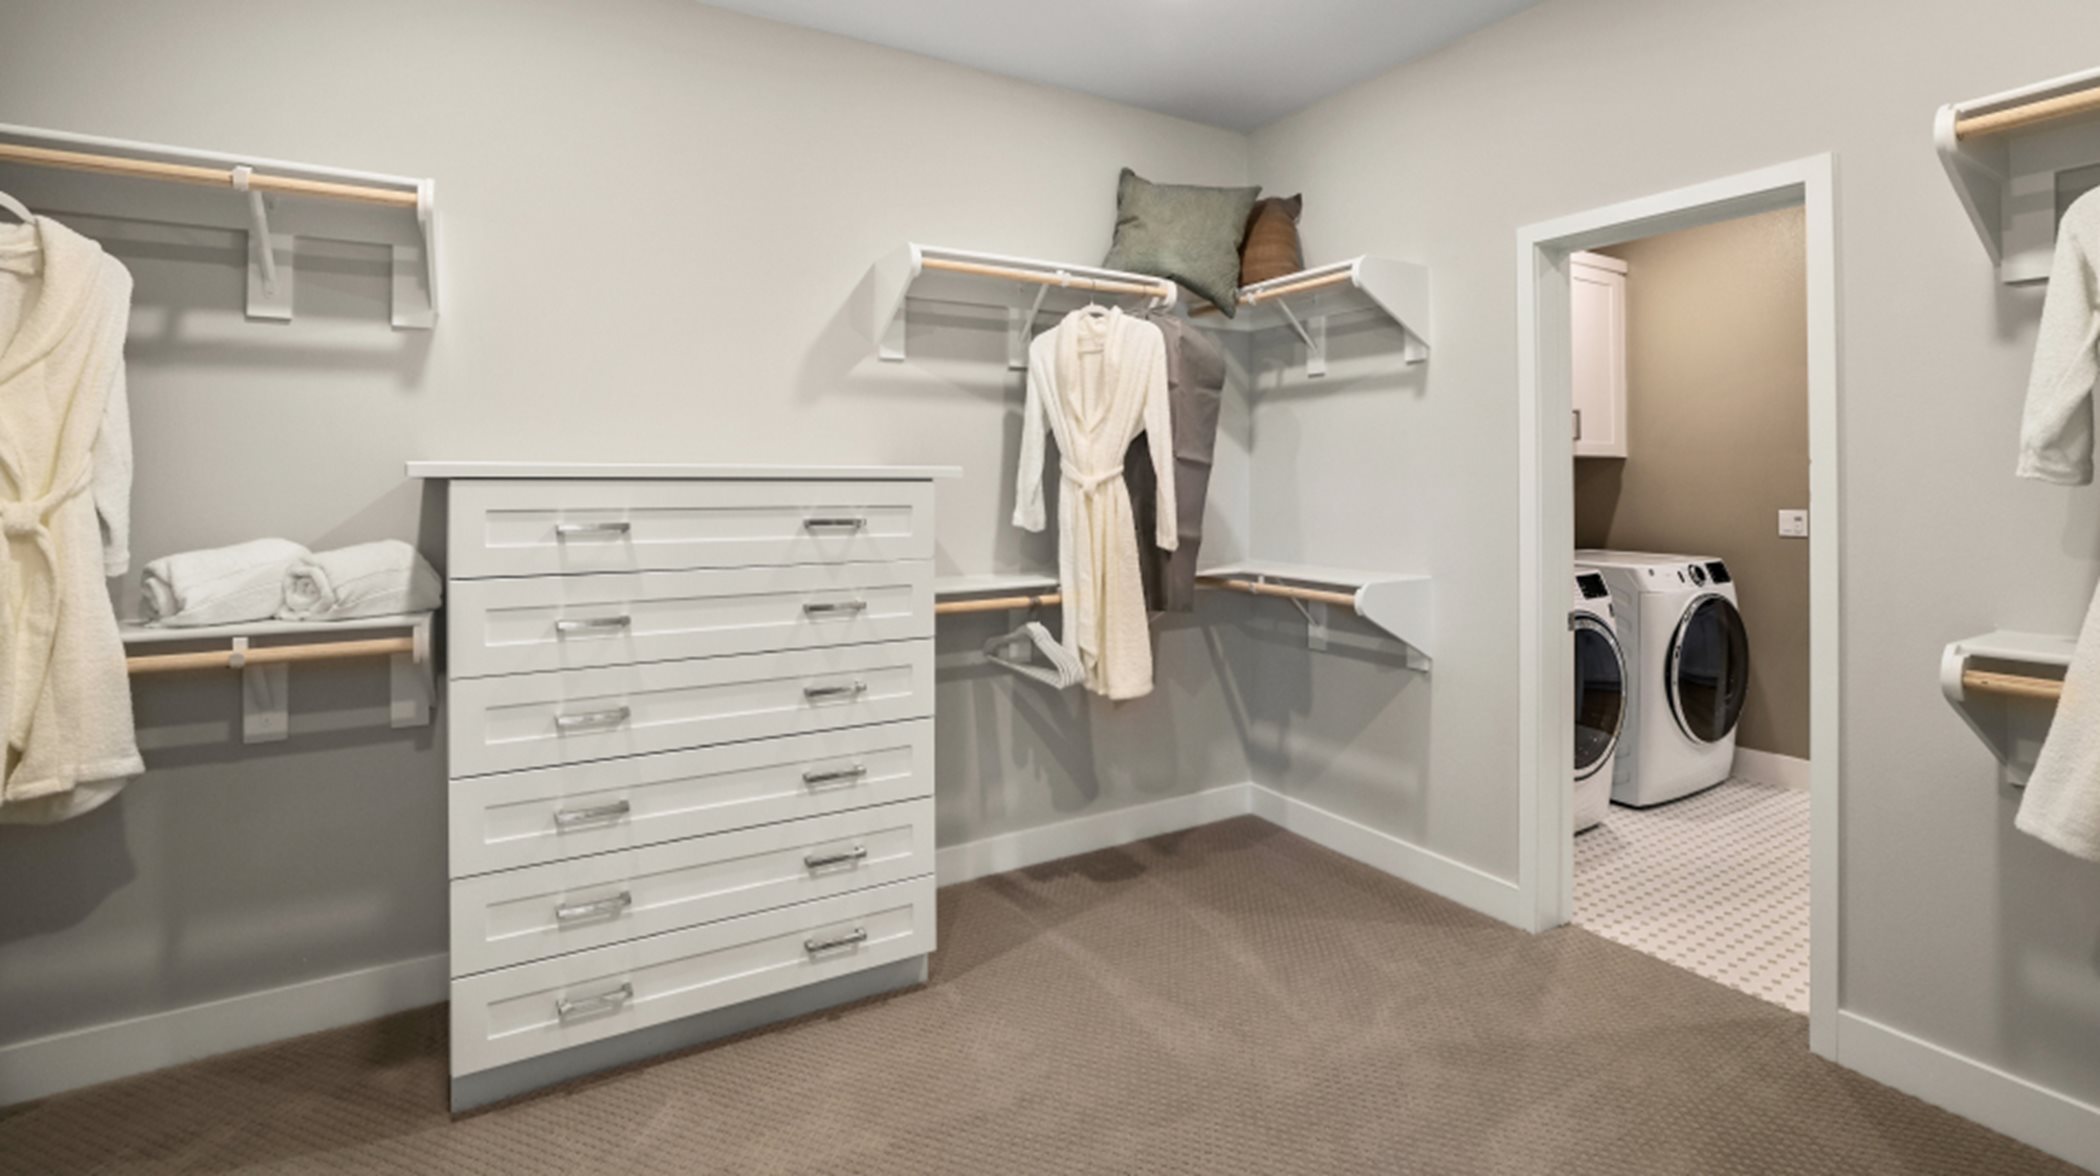 Walk-in closet with ample shelving